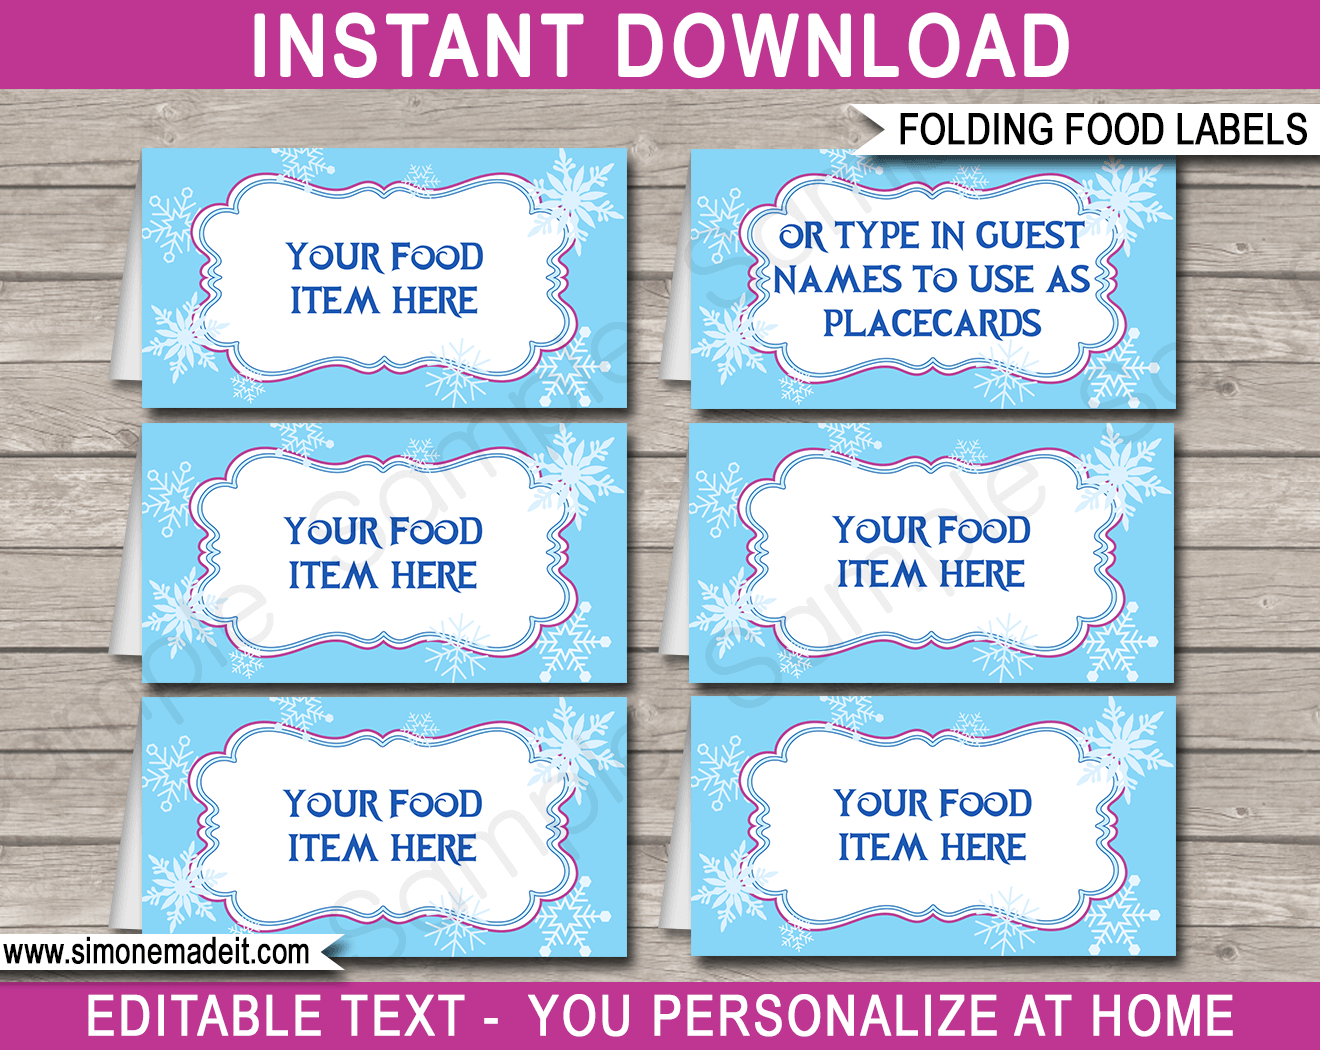 Printable Frozen Party Food Labels | Food Buffet Tags | Tent Cards | Place Cards | Winter Theme Birthday Party Decorations | DIY Editable Template | Instant Download via simonemadeit.com